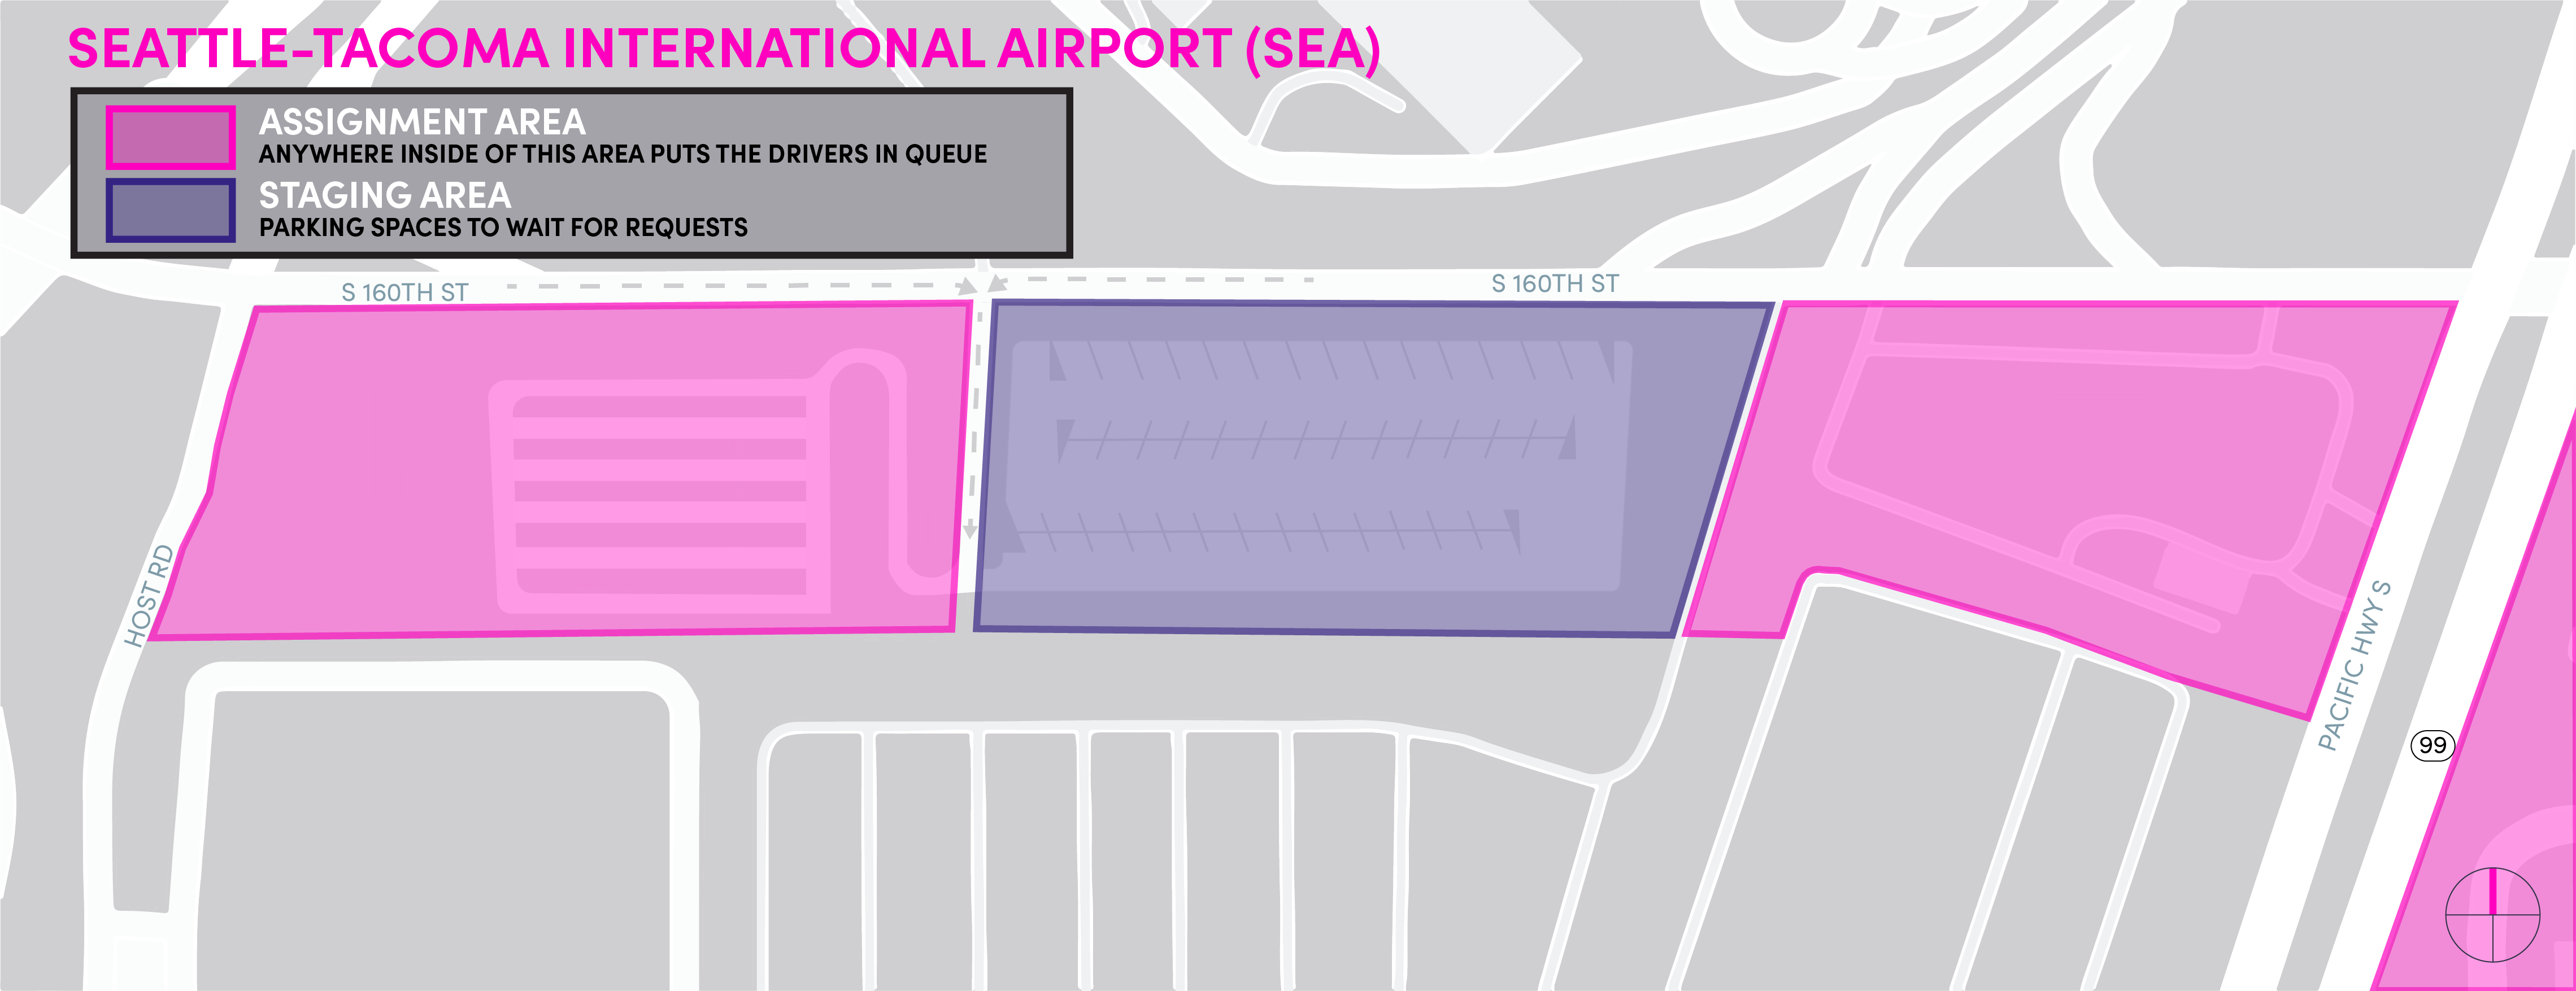 Seattle airport staging area